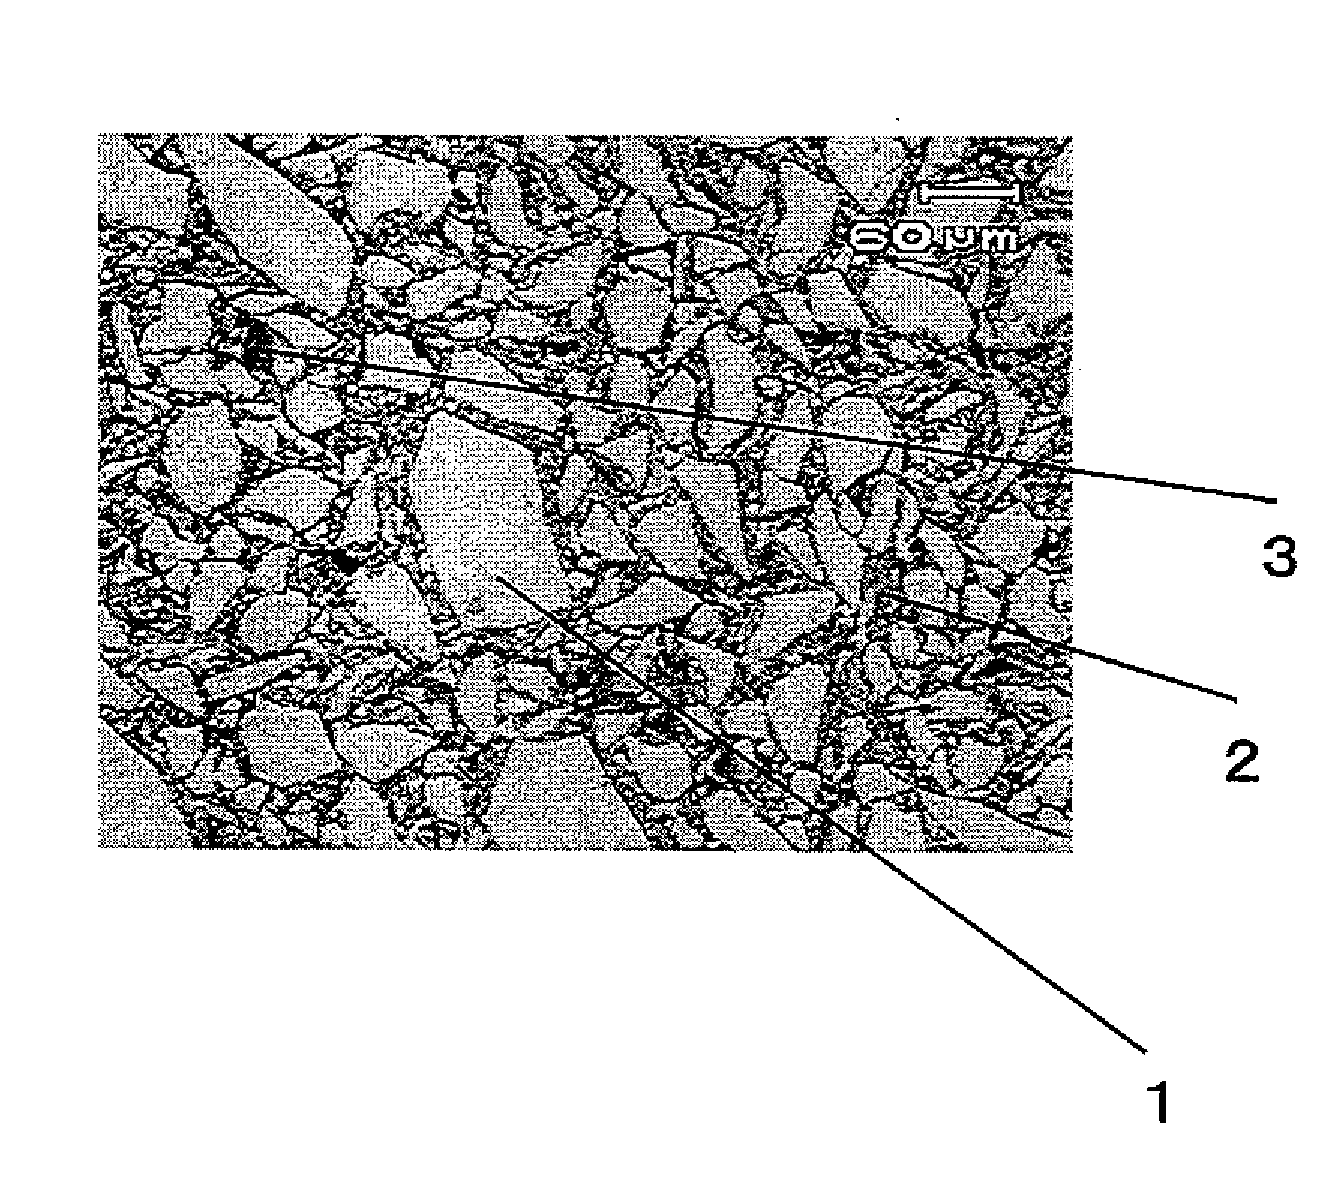 Zirconia-carbon-containing refractory and method for producing same